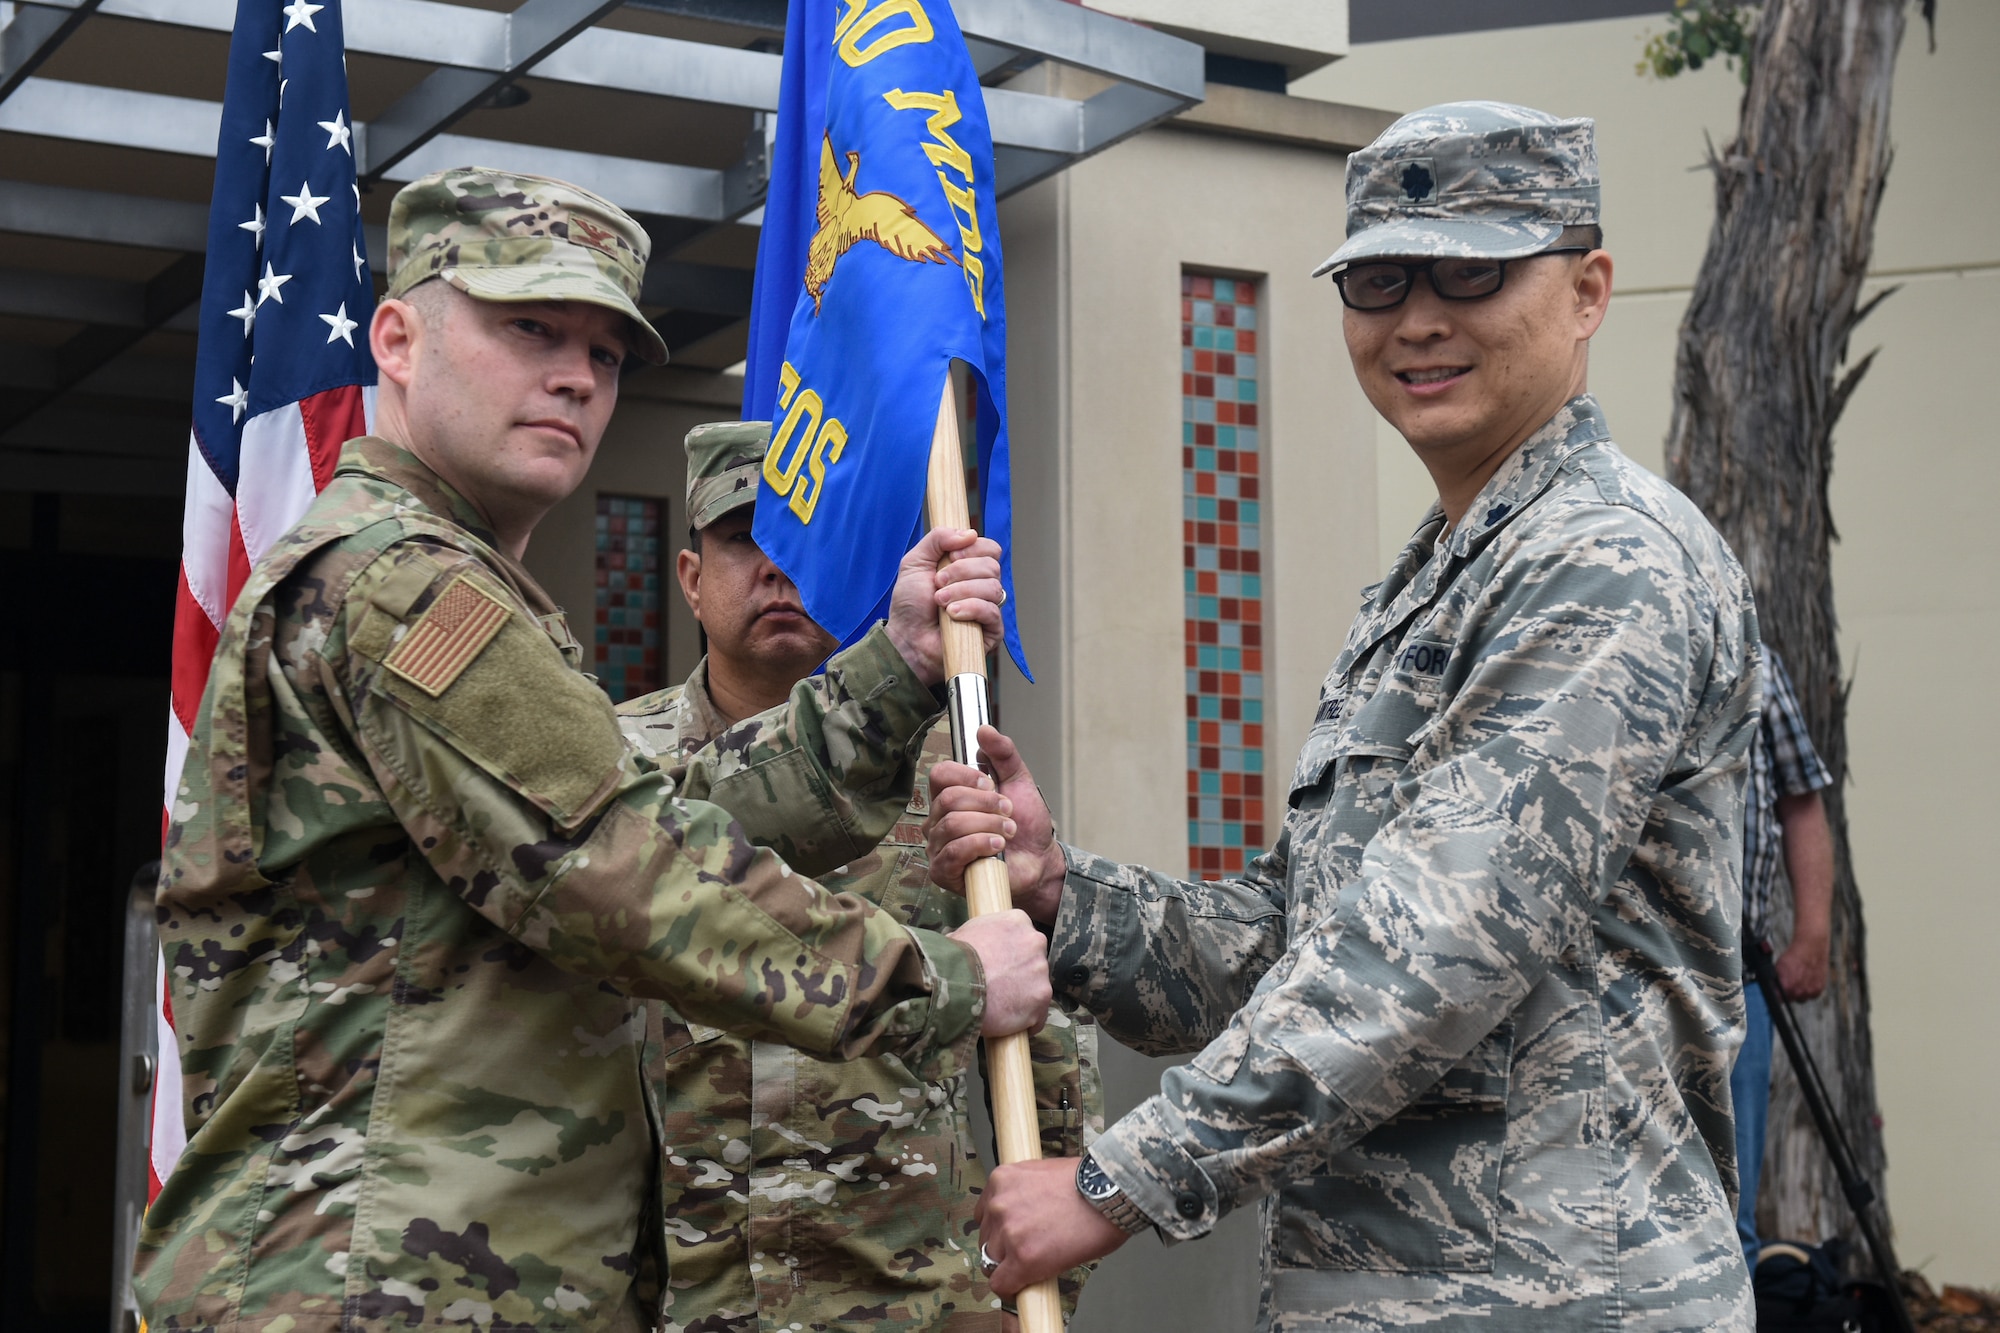 Col. Raymond Clydesdale, 30th Medical Group commander, transfers command of the newly activated 30th Health Care Operations Squadron to Lt. Col. Joseph Rountree, 30th HCOS commander, during the 30th MDG reorganization ceremony Aug. 23, 2019, at Vandenberg Air Force Base, Calif.